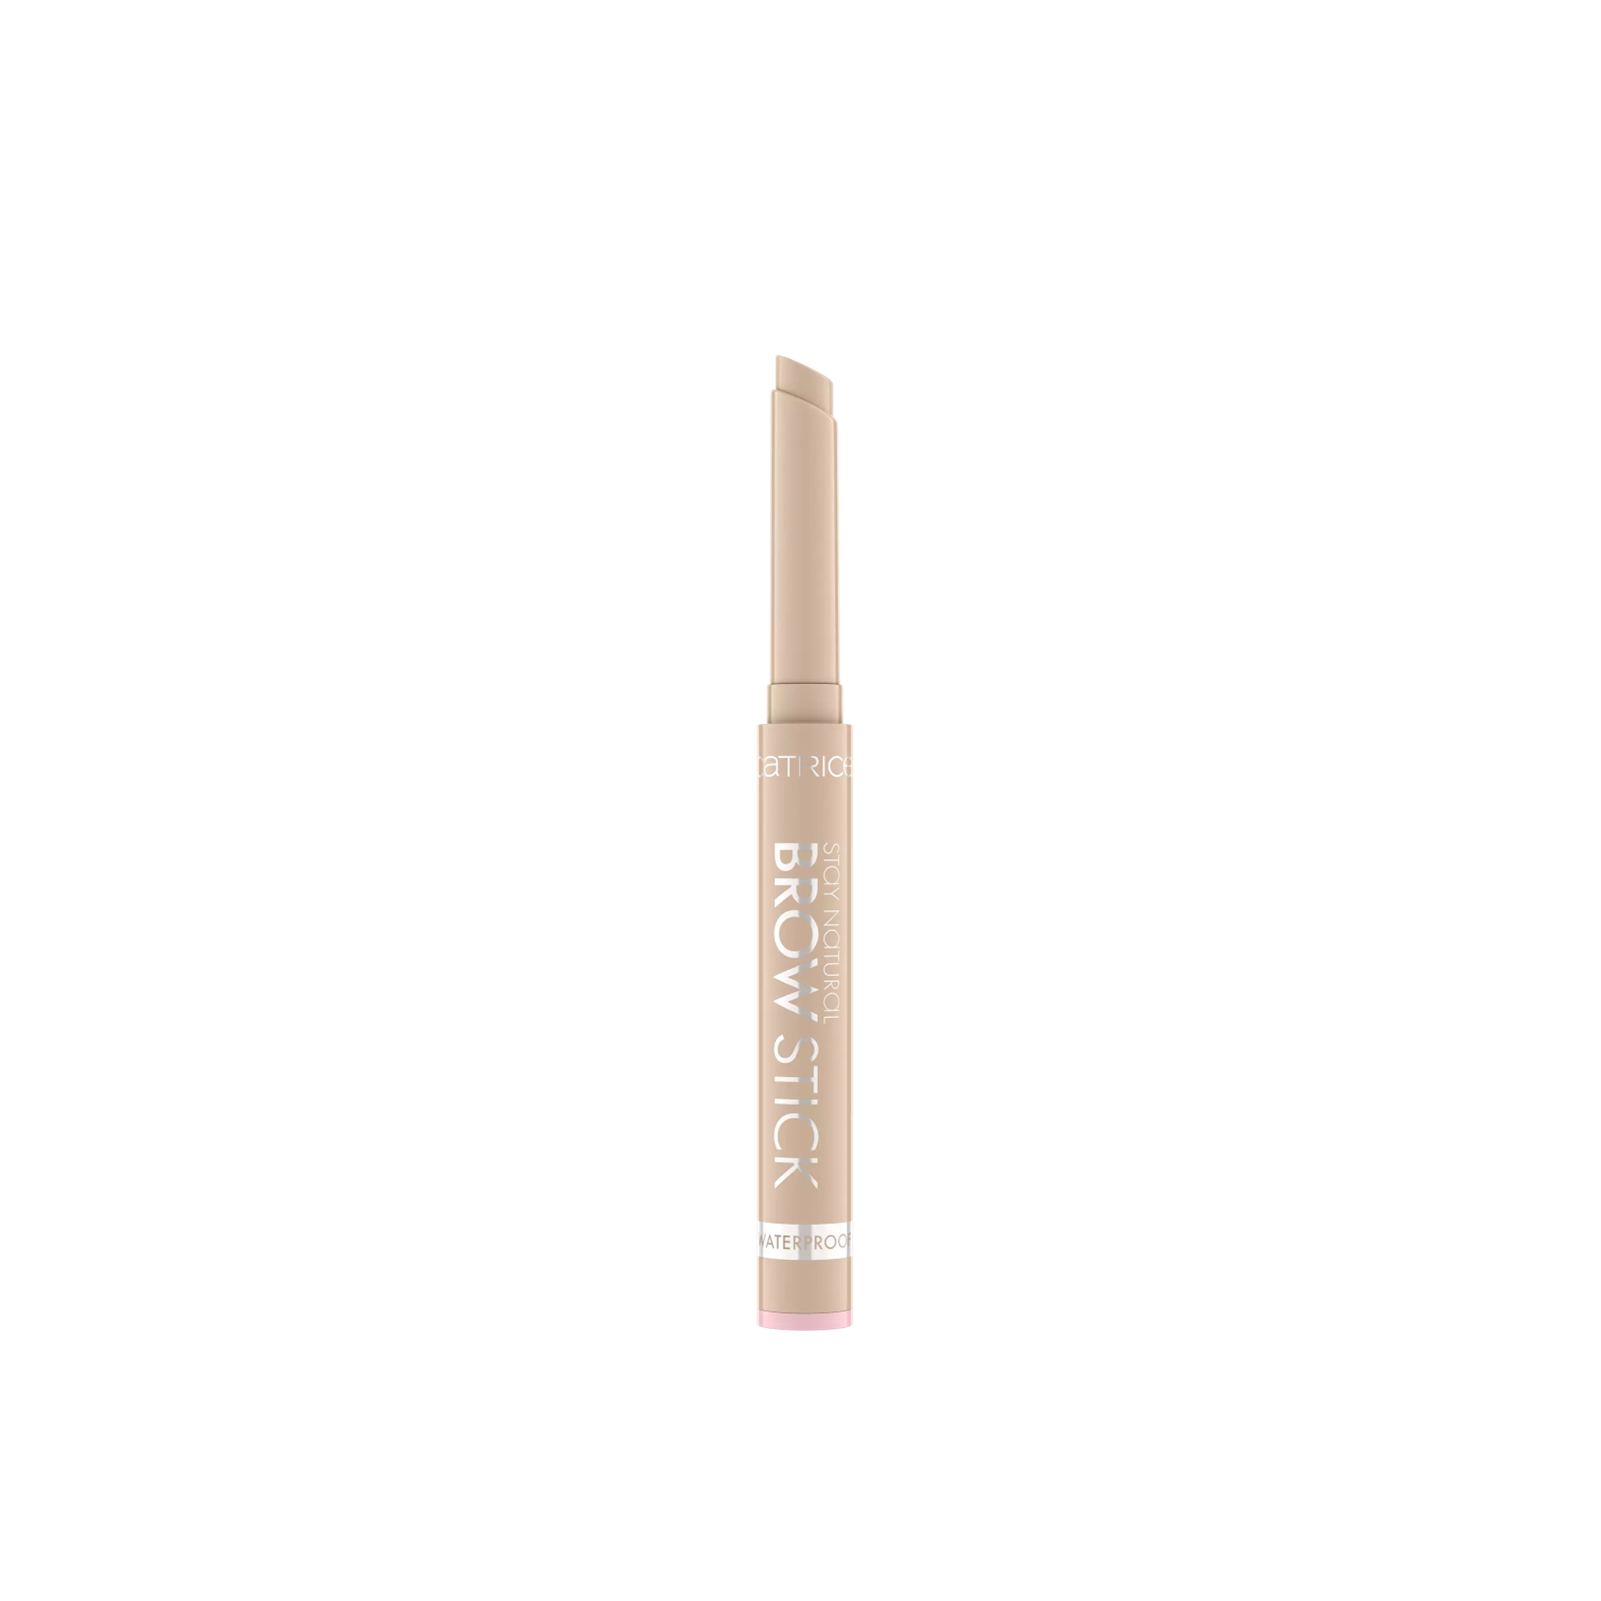 1g 010 Stay Soft Buy Natural USA Stick Catrice Brow Waterproof · oz) (0.03 Blonde